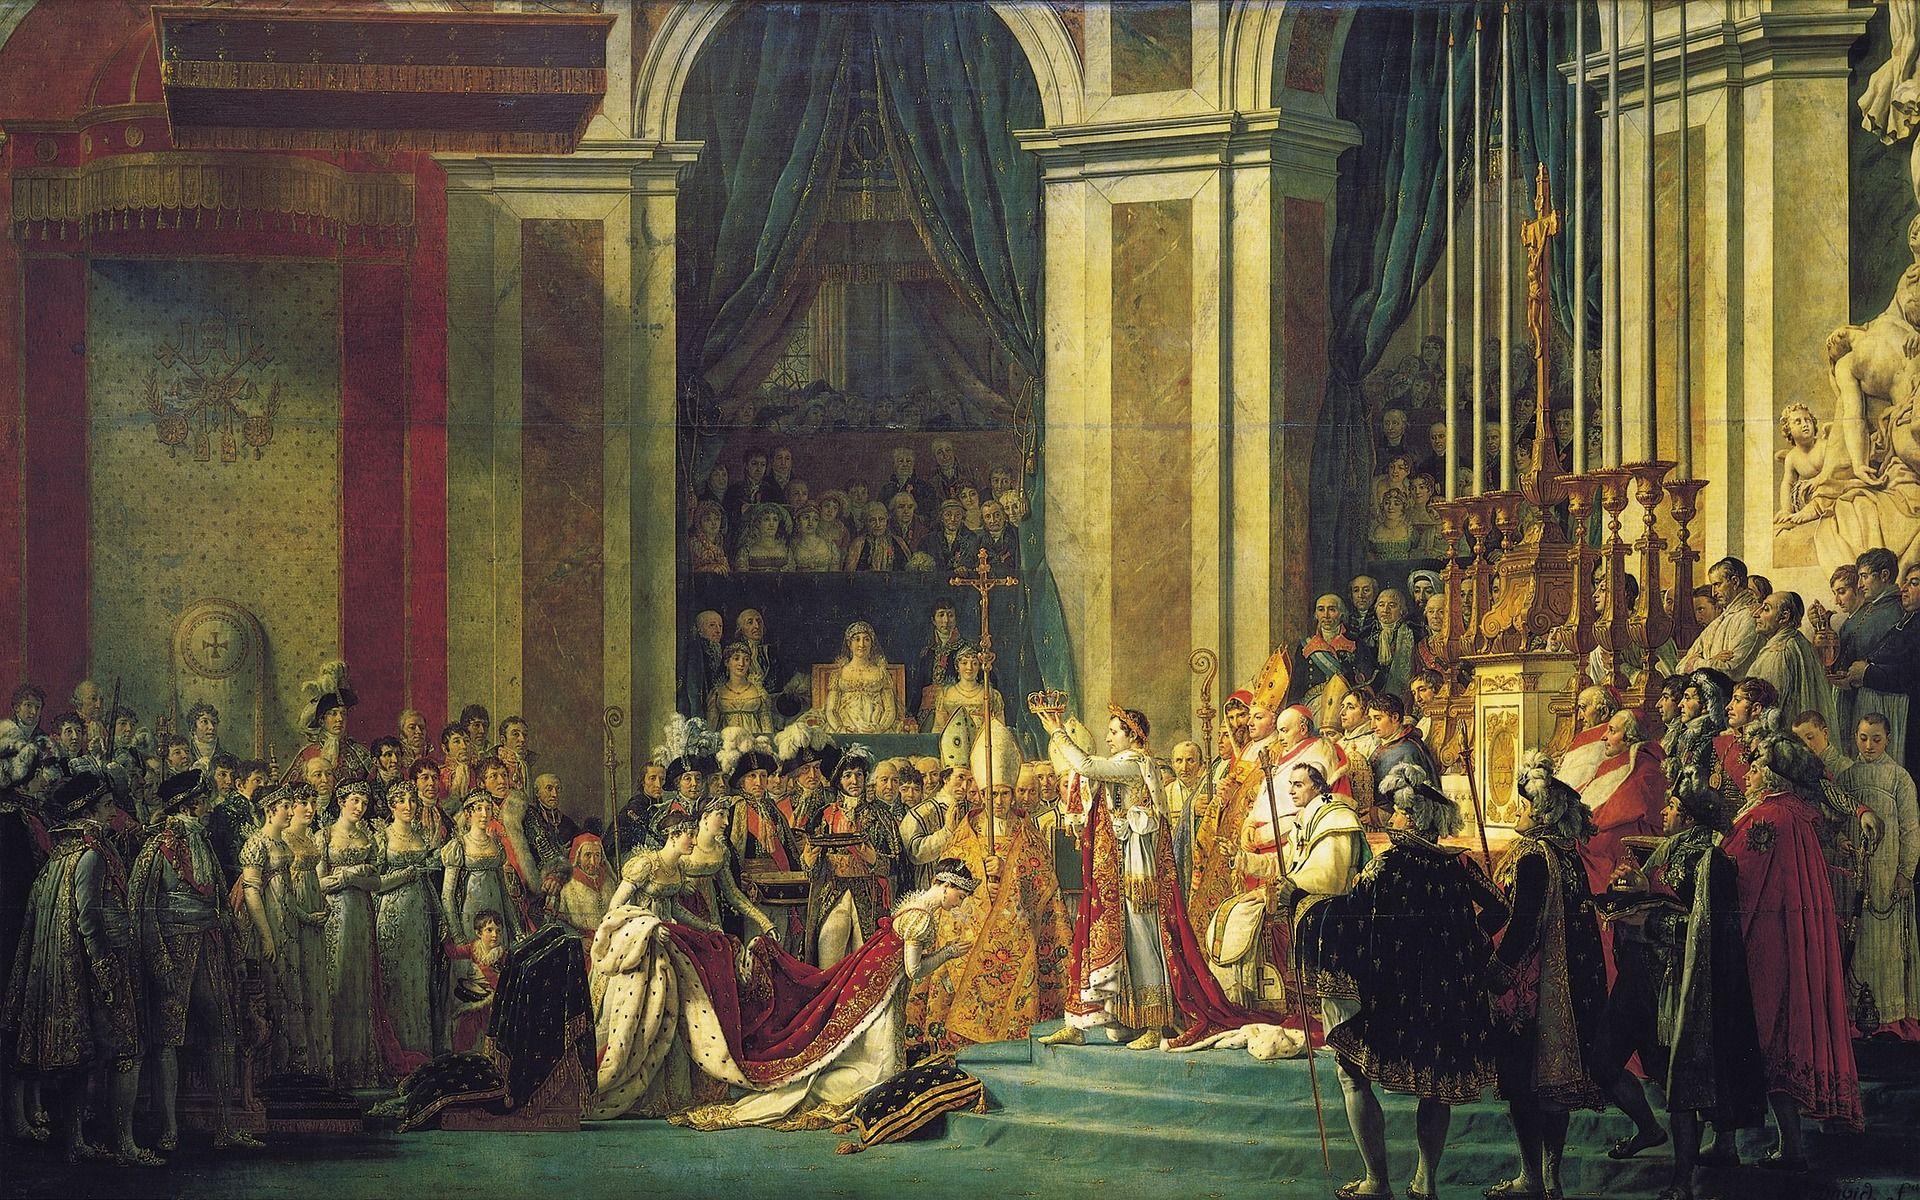 The Coronation of Napoleon at the Louvre Museum in Paris, France